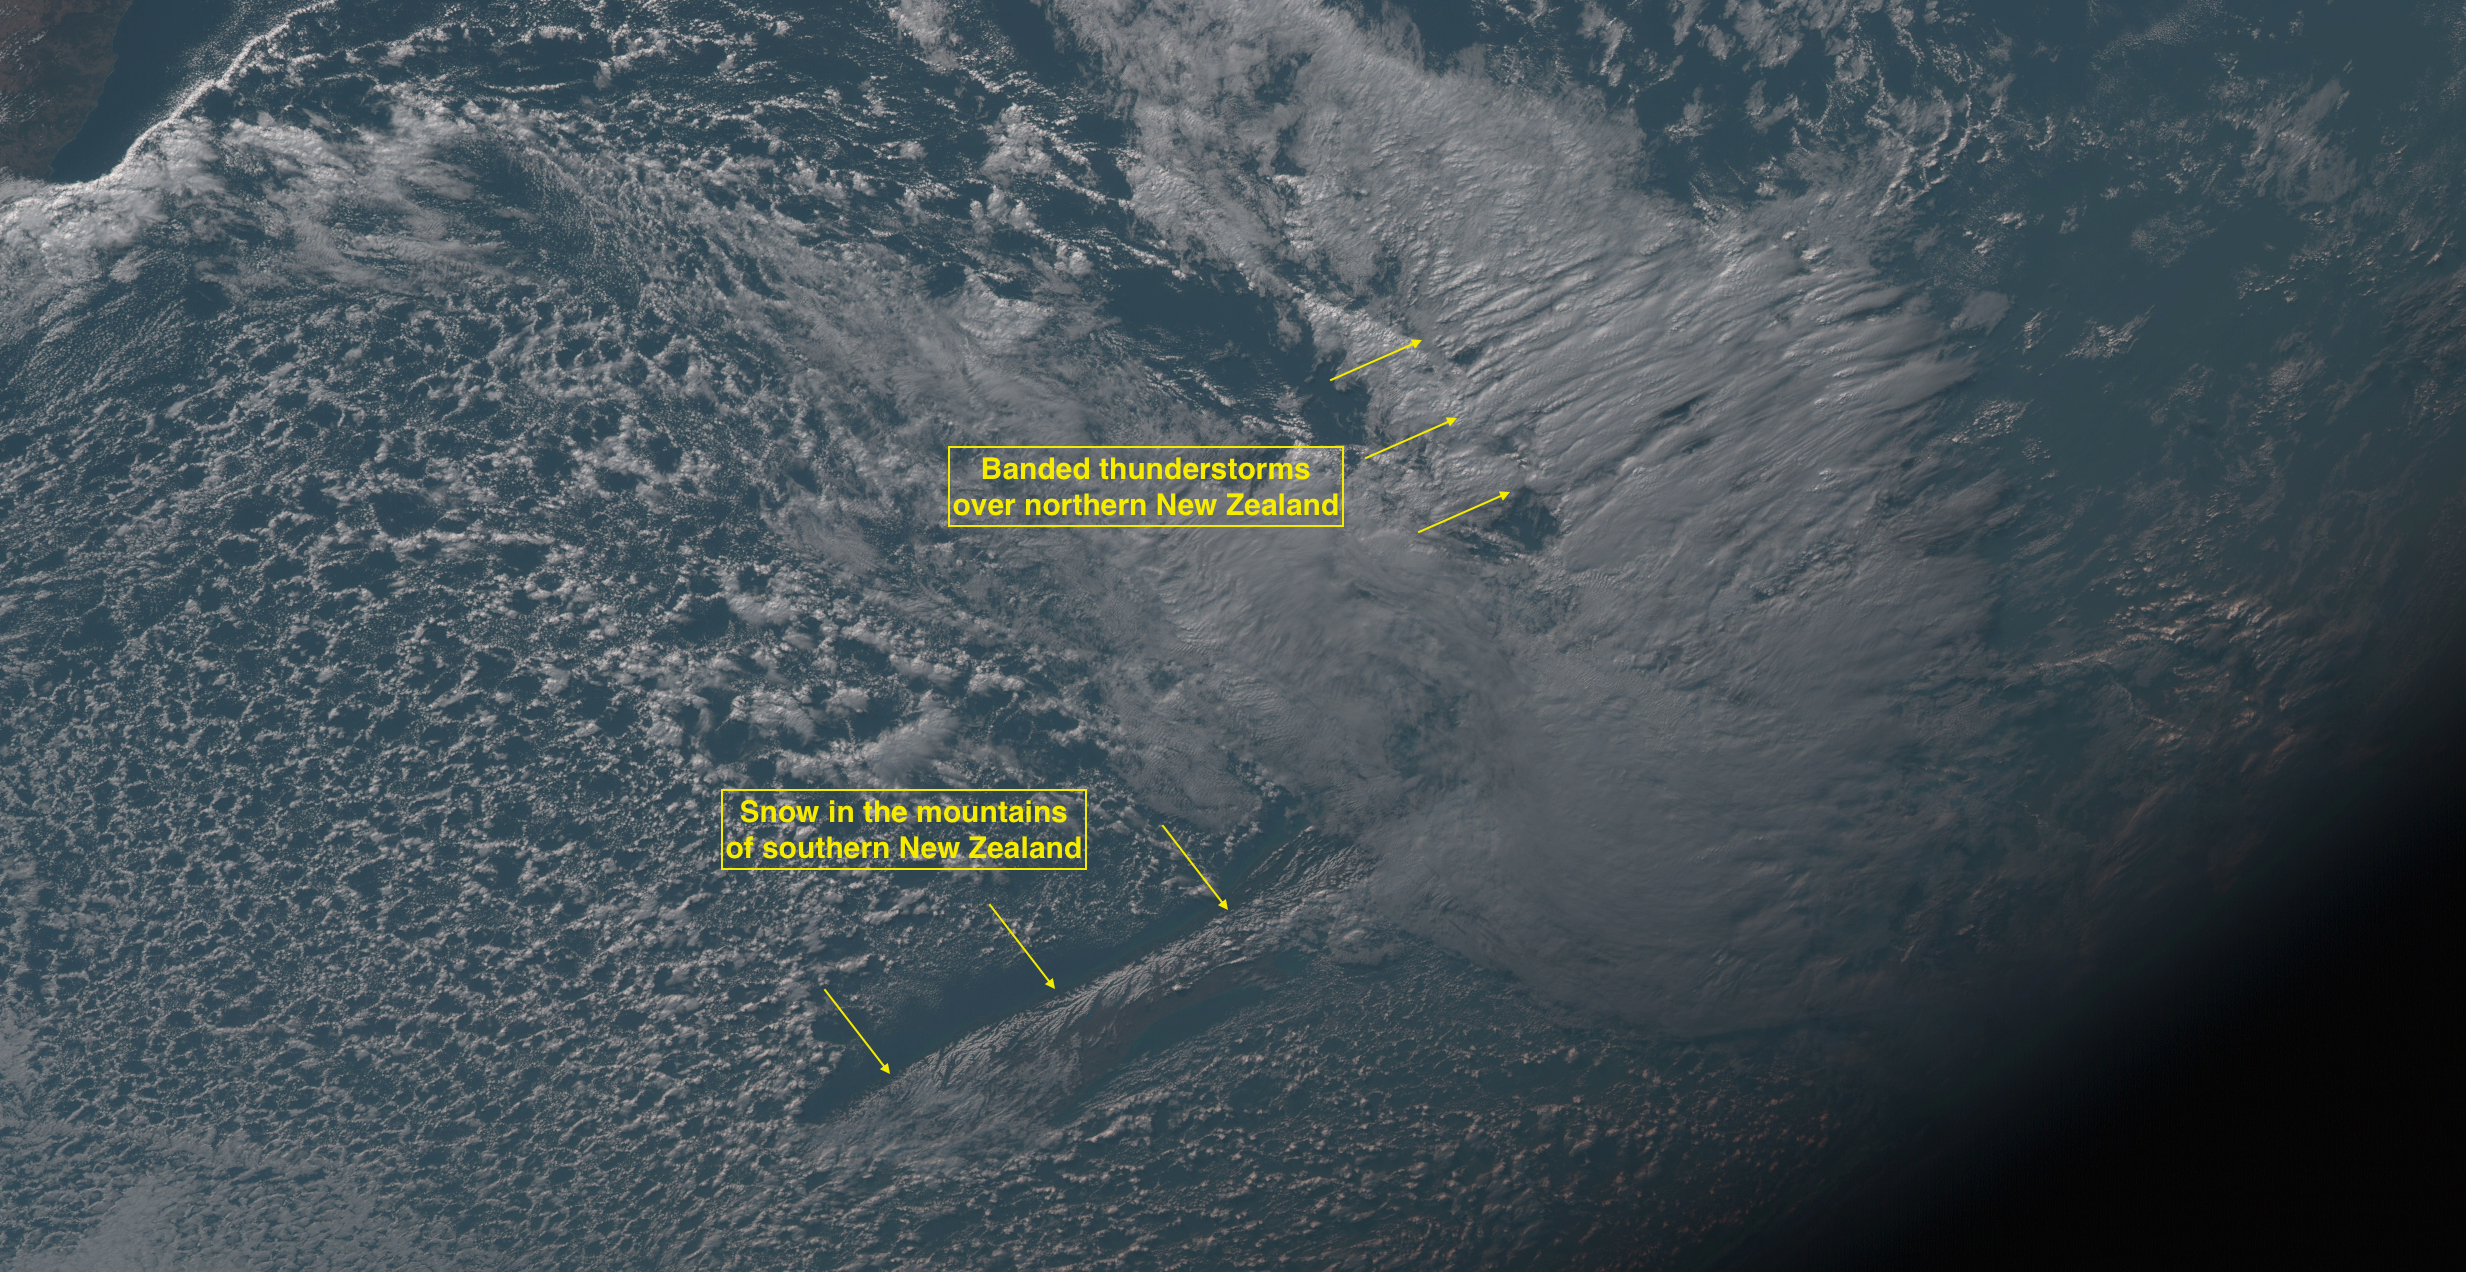 Banded thunderstorms over northern New Zealand, and snow cover in the mountains of southern New Zealand